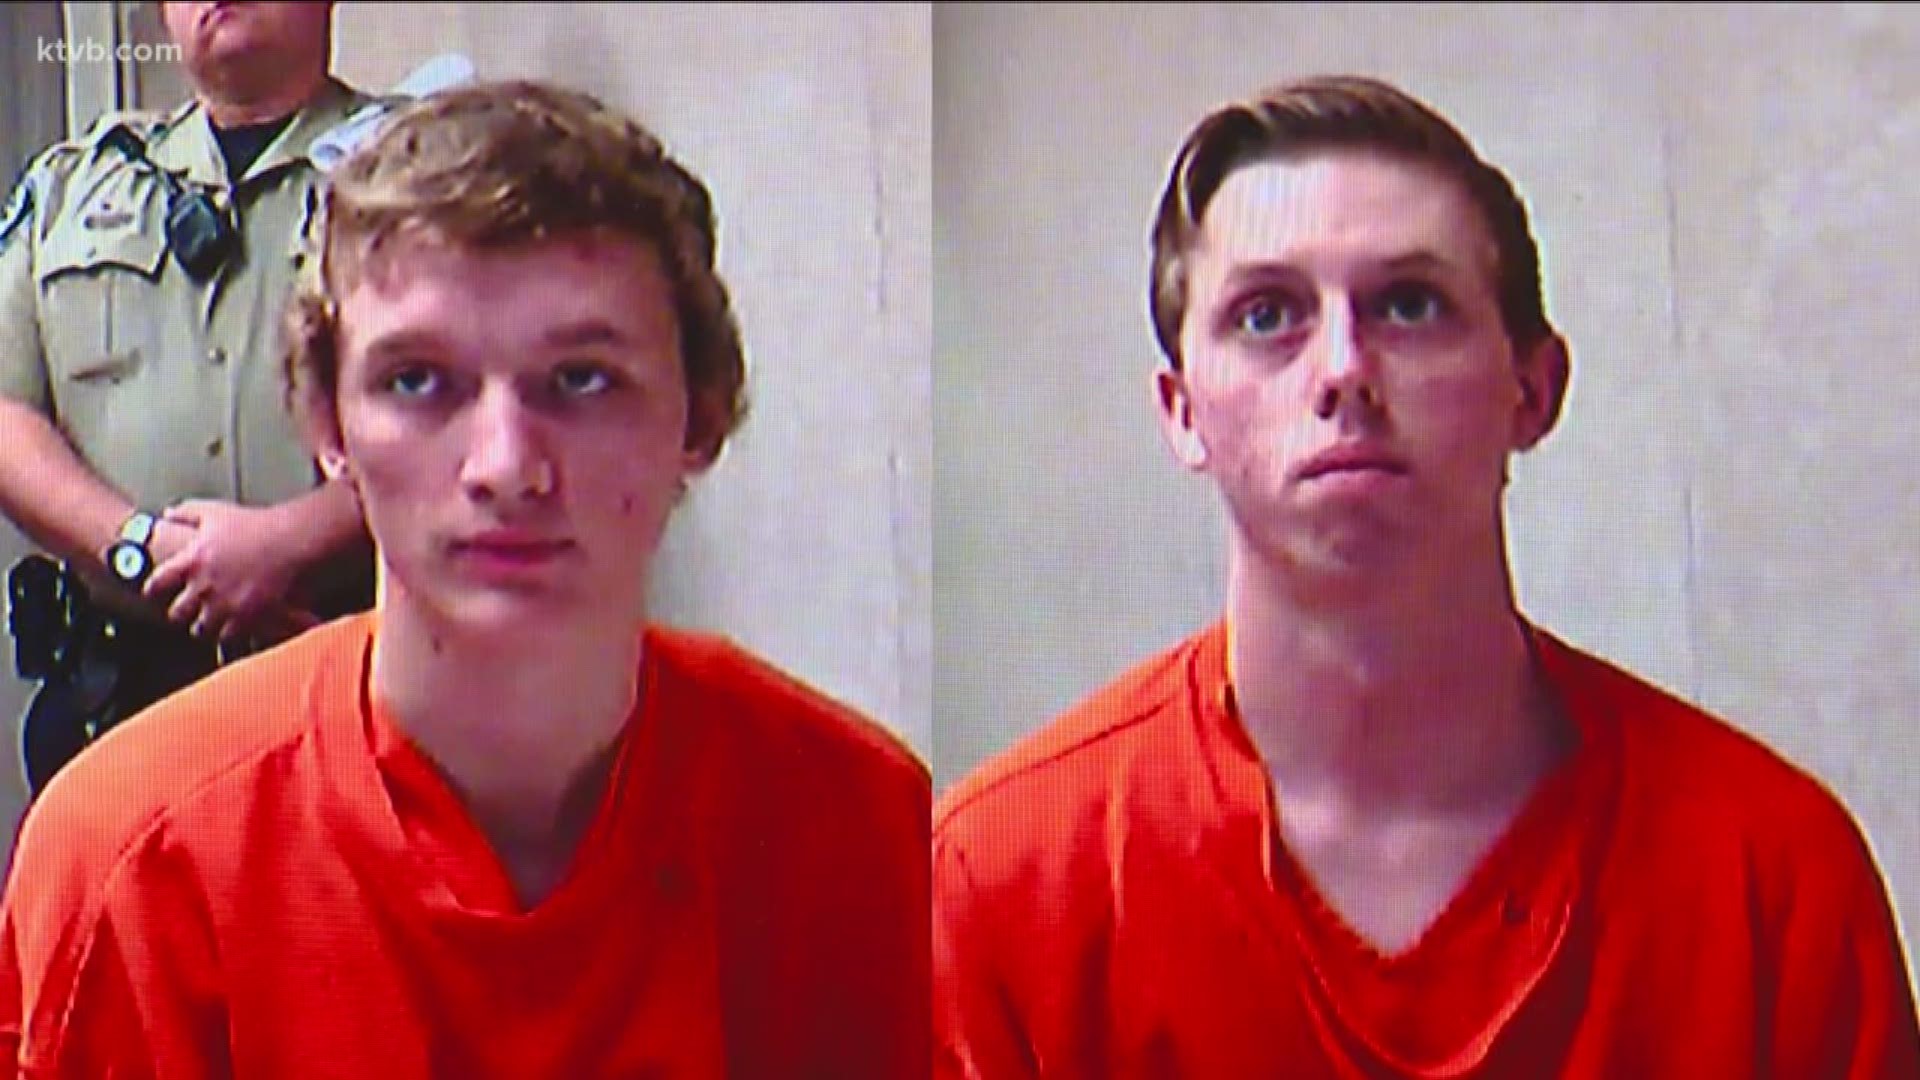 Two men accused of robbing and beating a 17-year-old appeared in court Thursday.